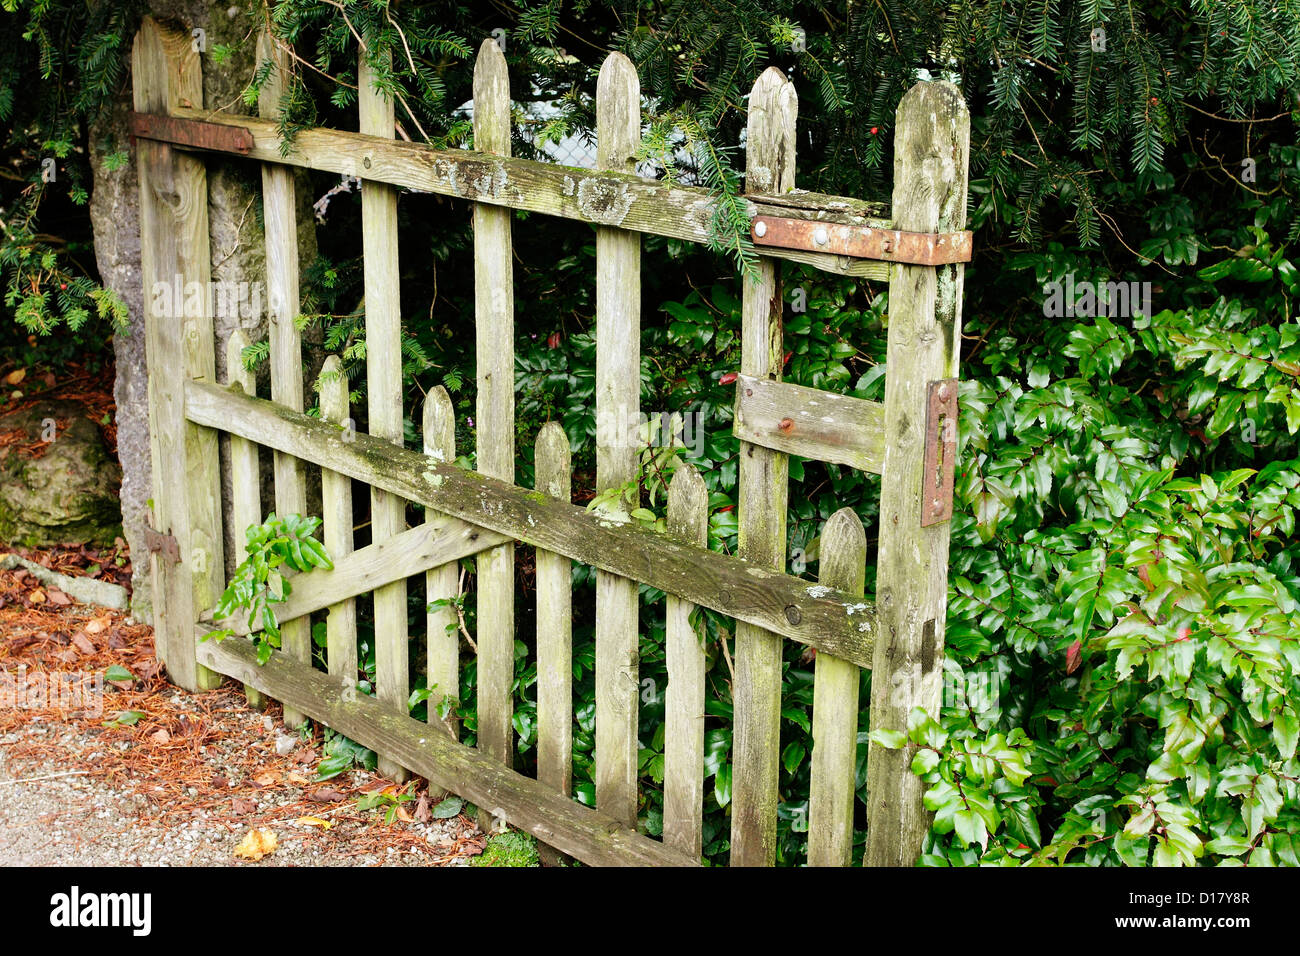 A Rustic wooden gate. Stock Photo